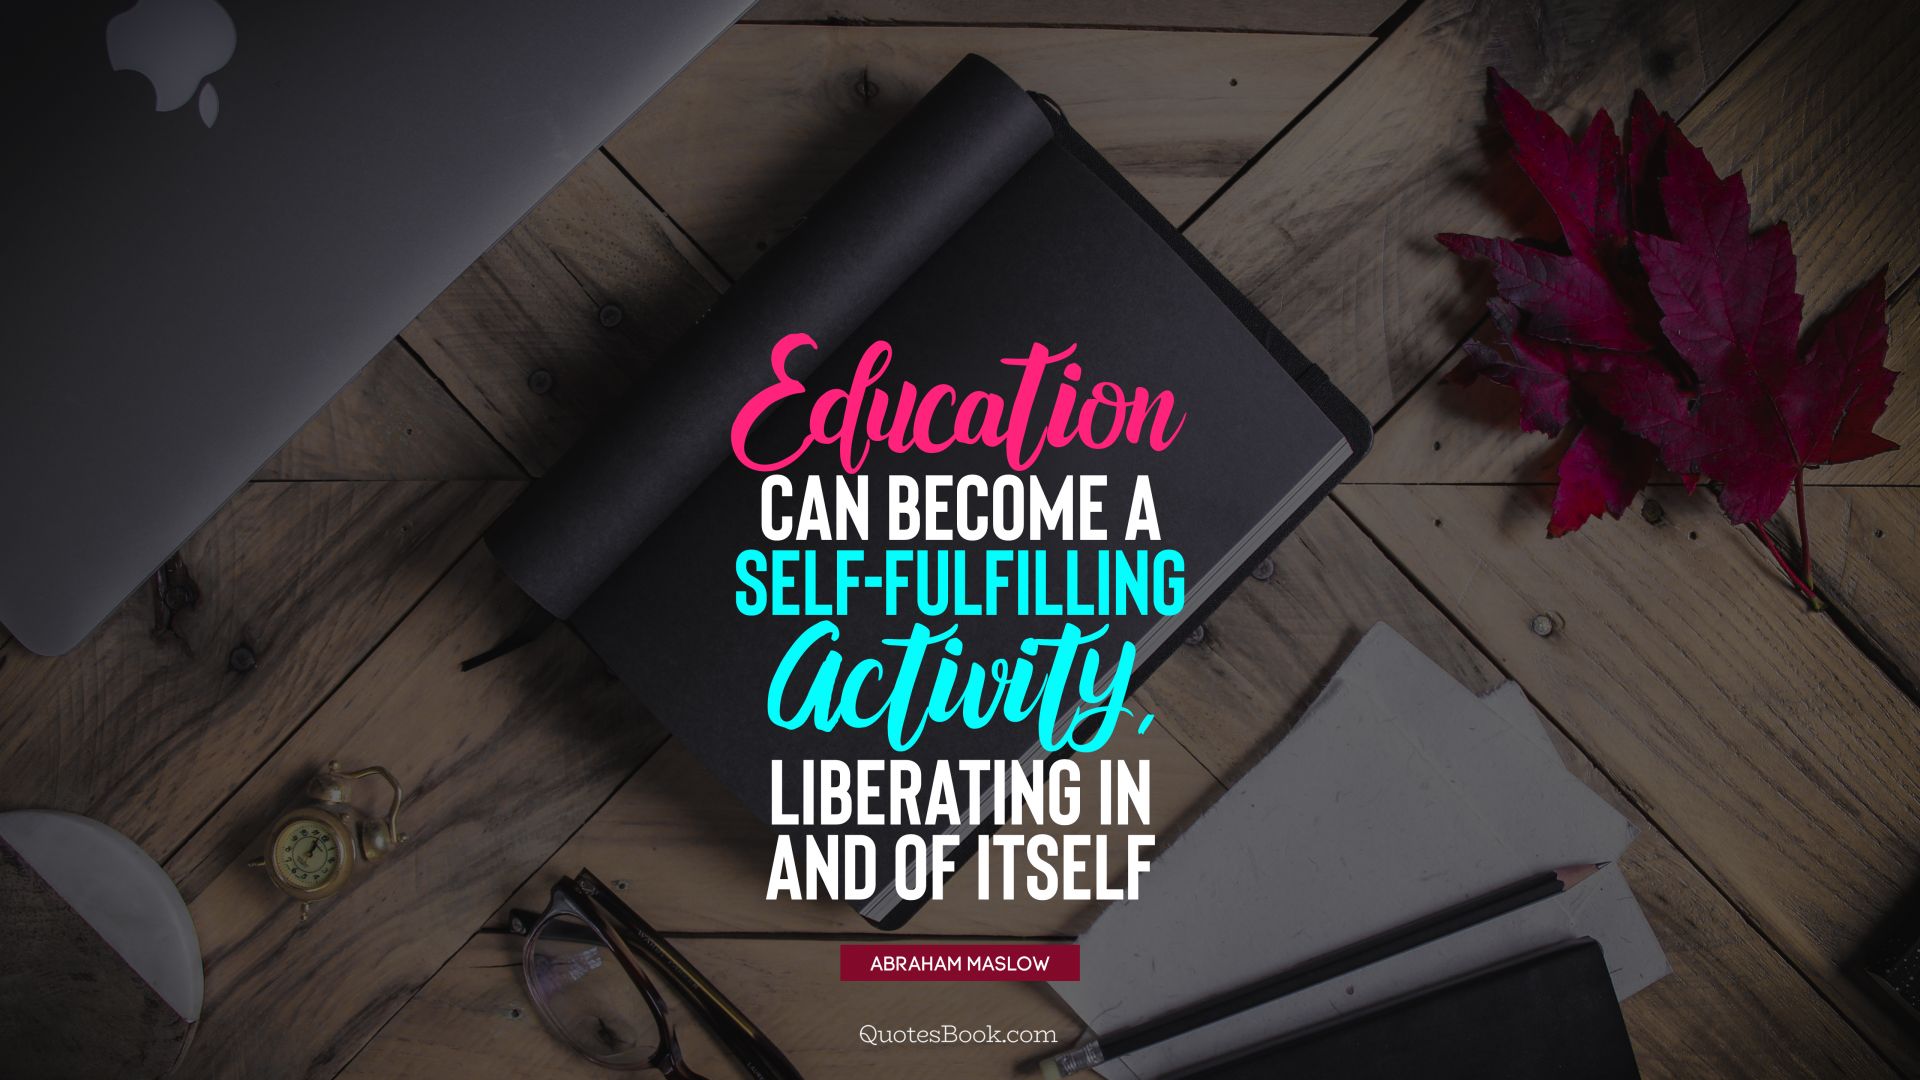 Education can become a self-fulfilling activity, liberating in and of itself. - Quote by Abraham Maslow